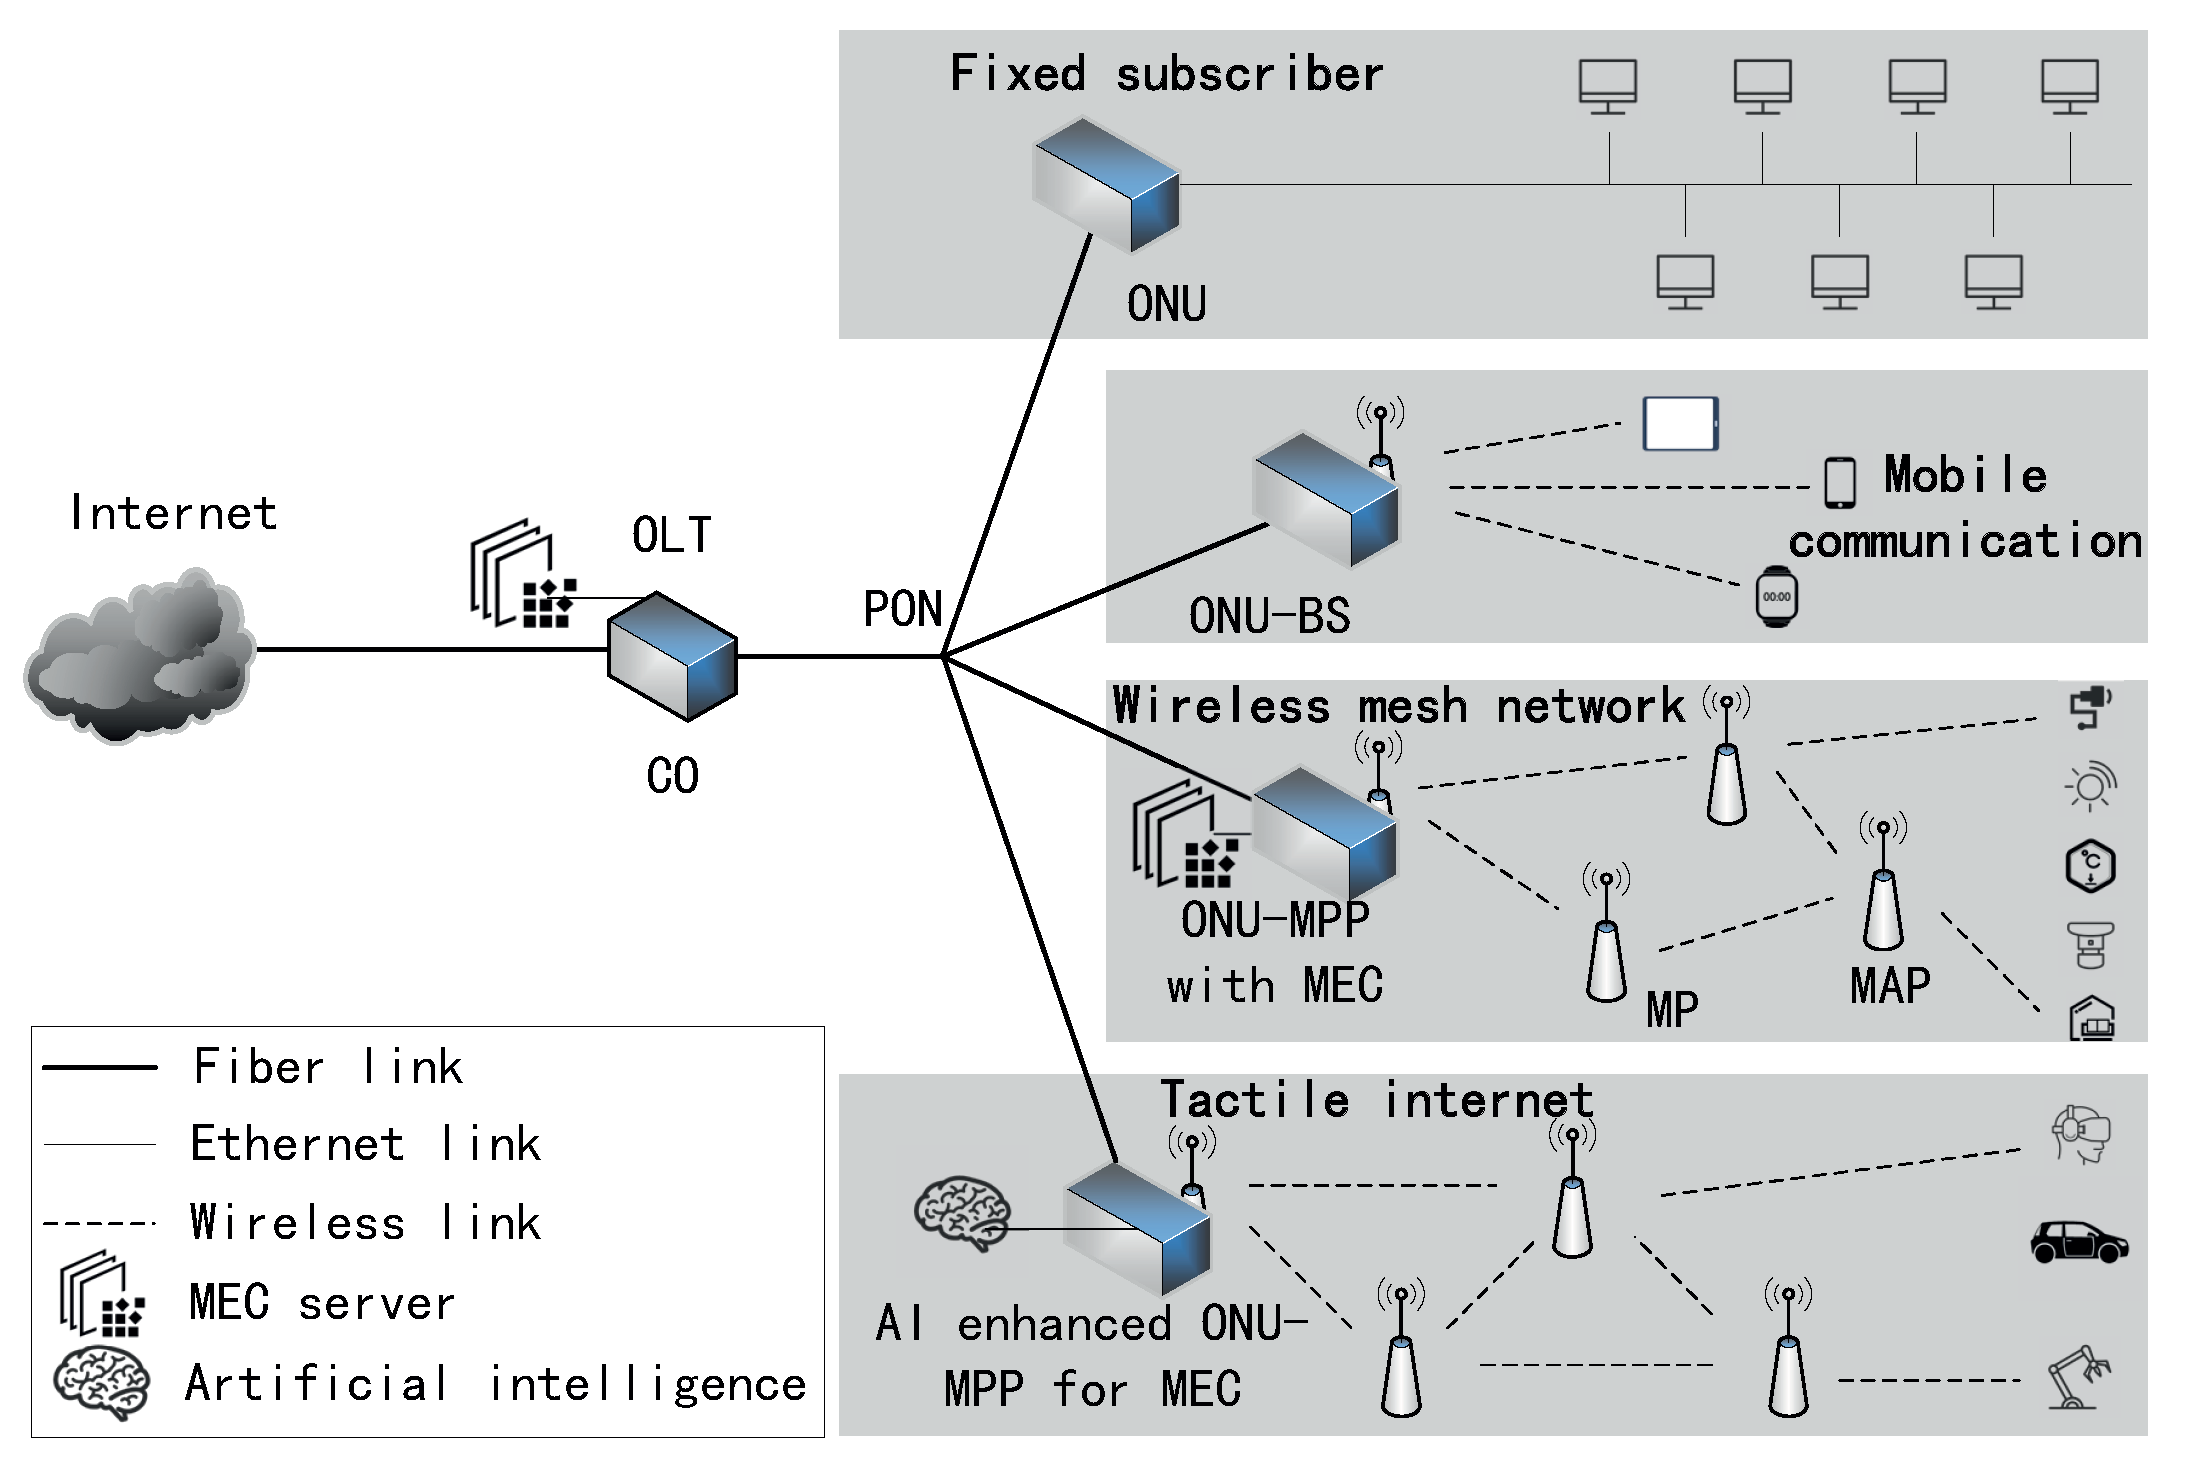 Applied Sciences | Free Full-Text | A Latency-Aware Offloading Strategy  over Fiber-Wireless (FiWi) Infrastructures for Tactile Internet Services |  HTML